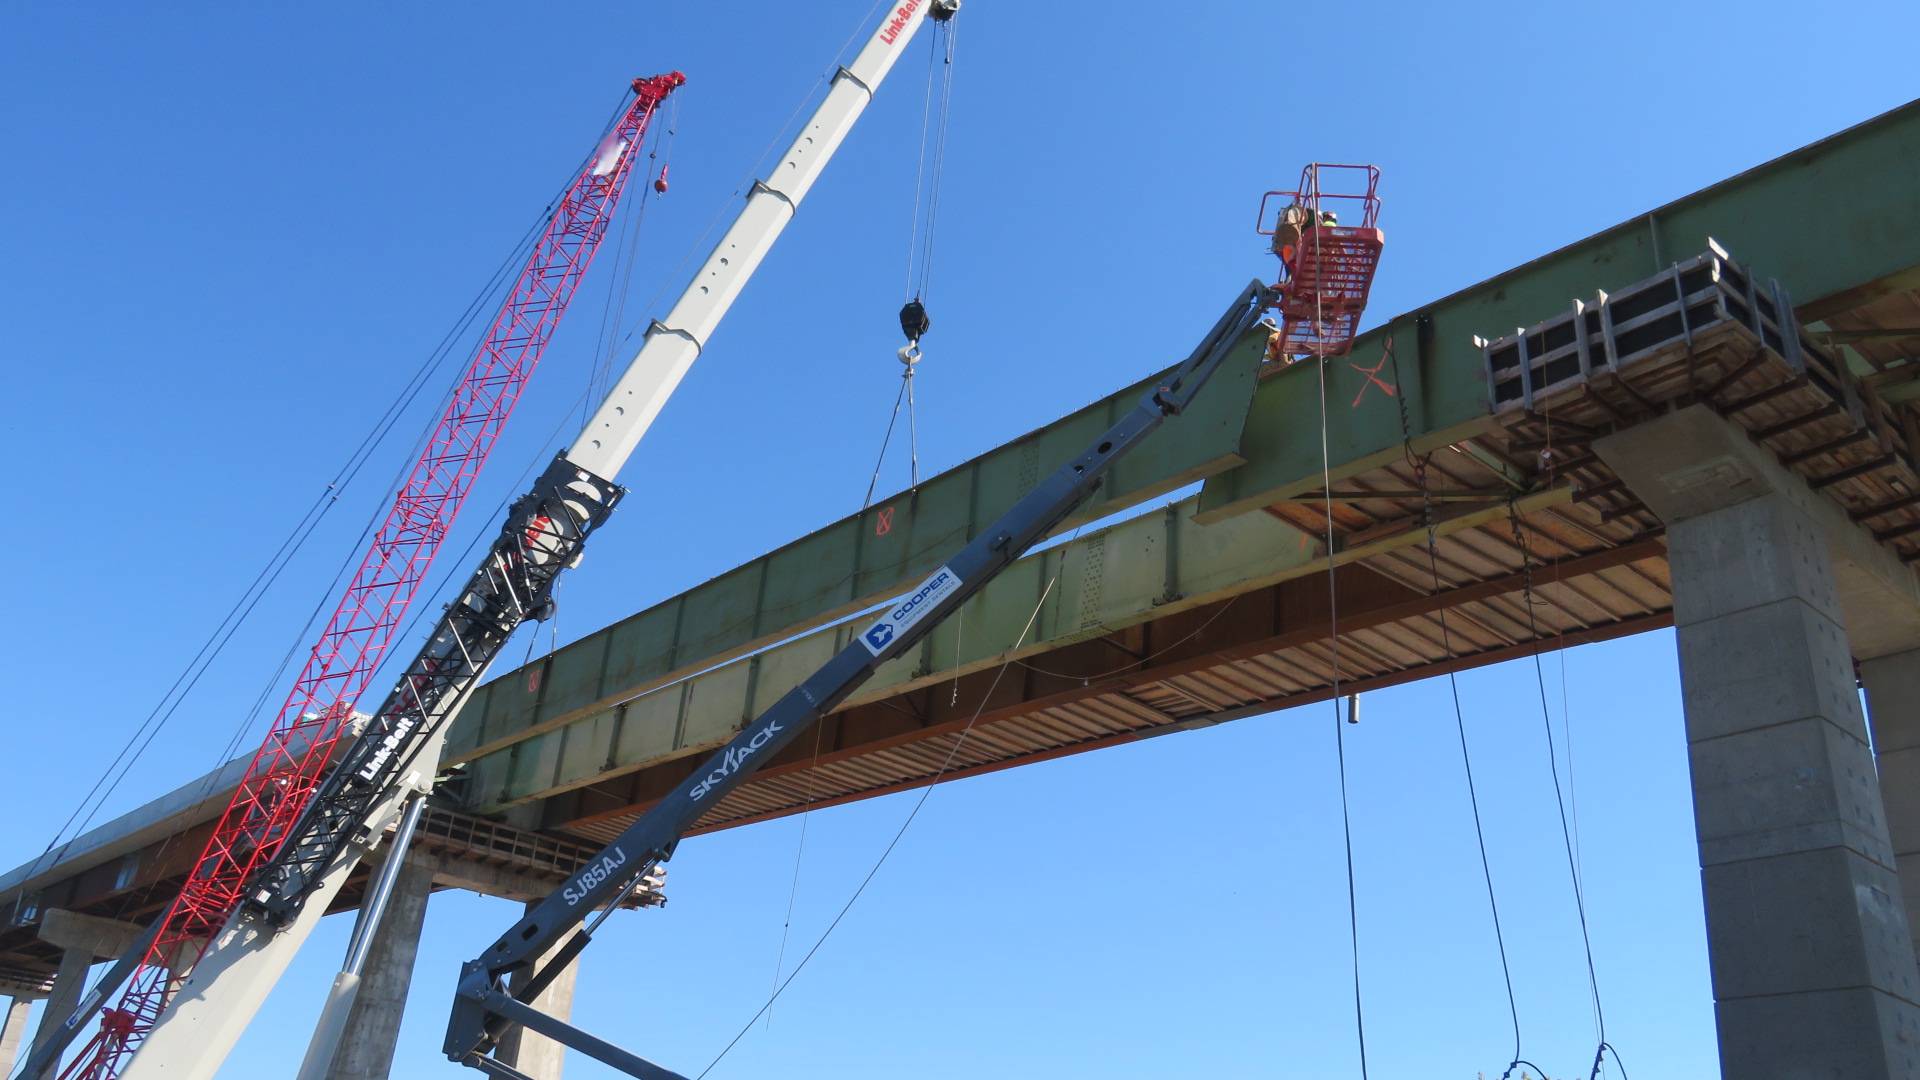 Moving the girder section into place to be lowered